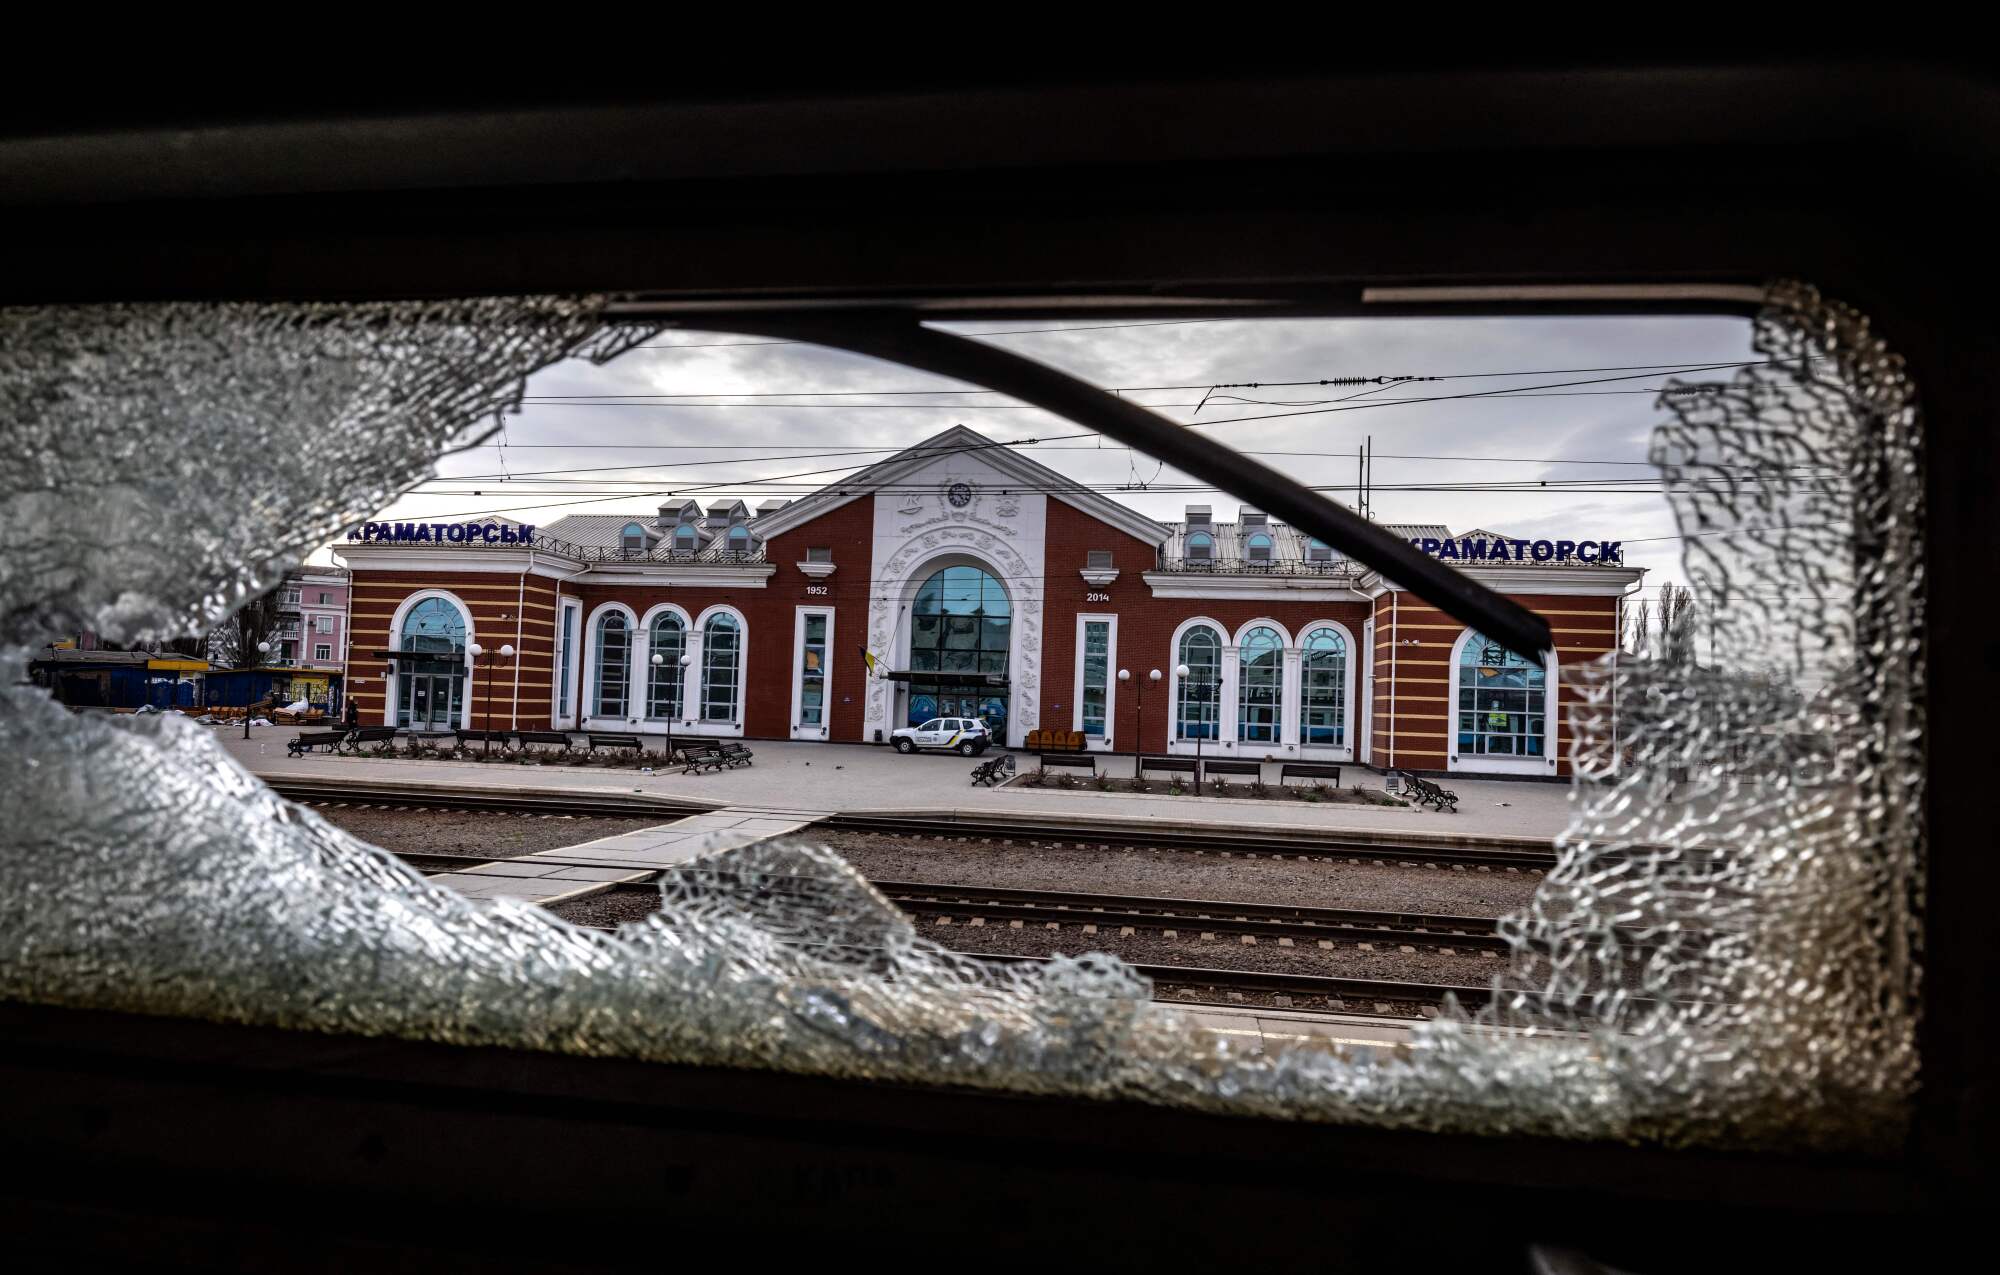 A train station is framed through the shattered glass of a train window.